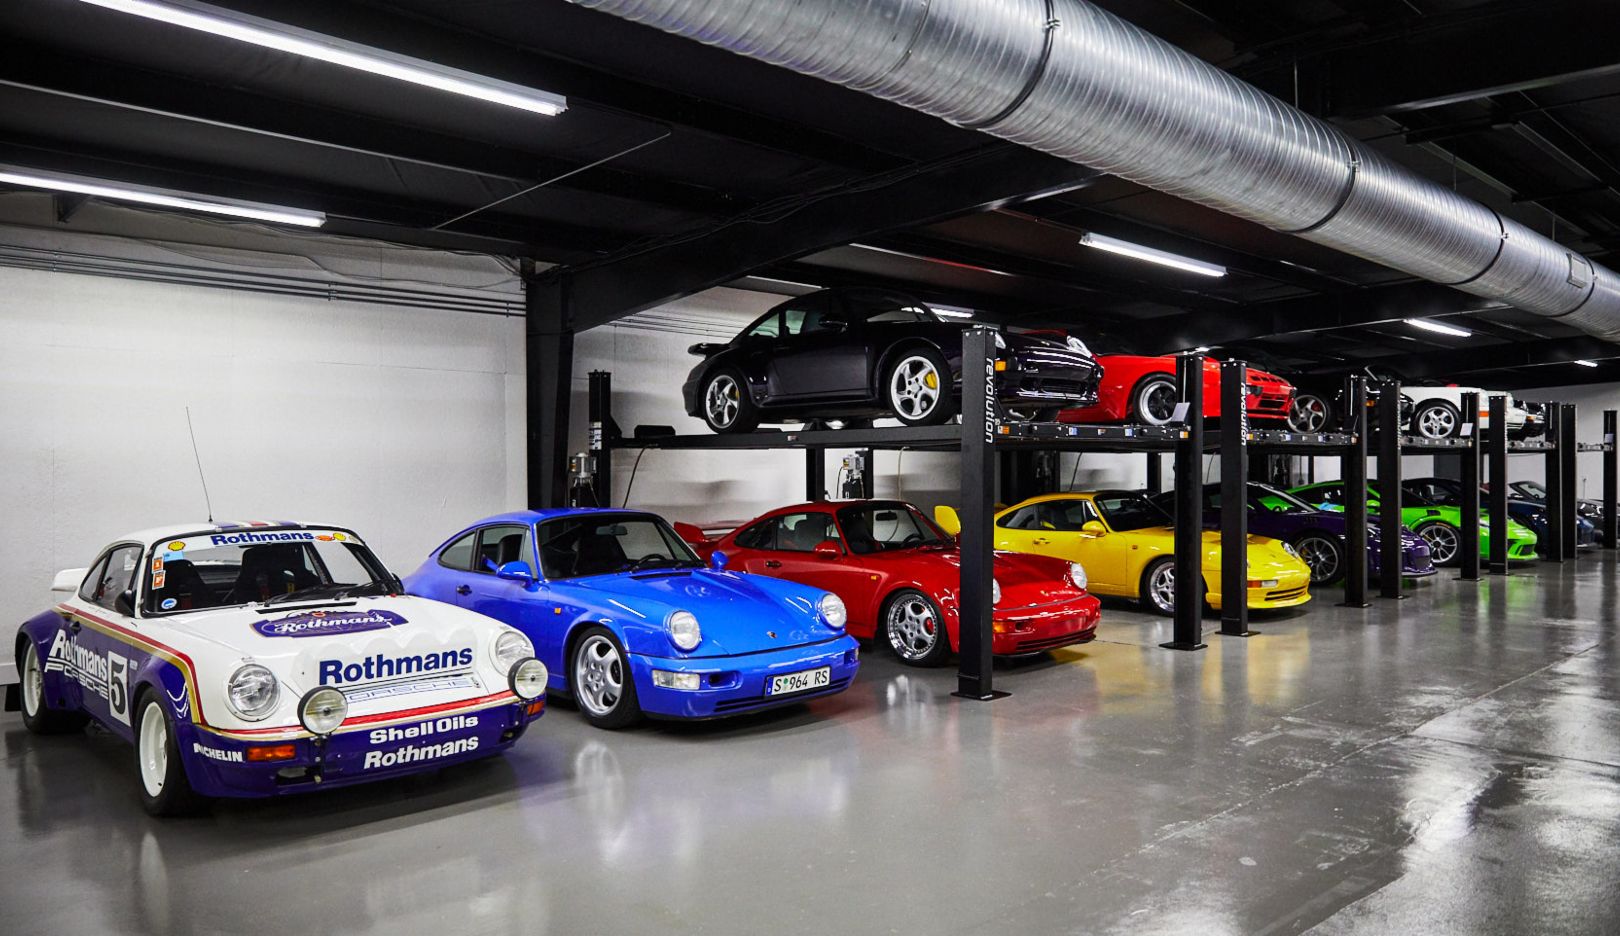 The collection is a journey in time through the generations of the Porsche 911. The RS versions are a particular focus.